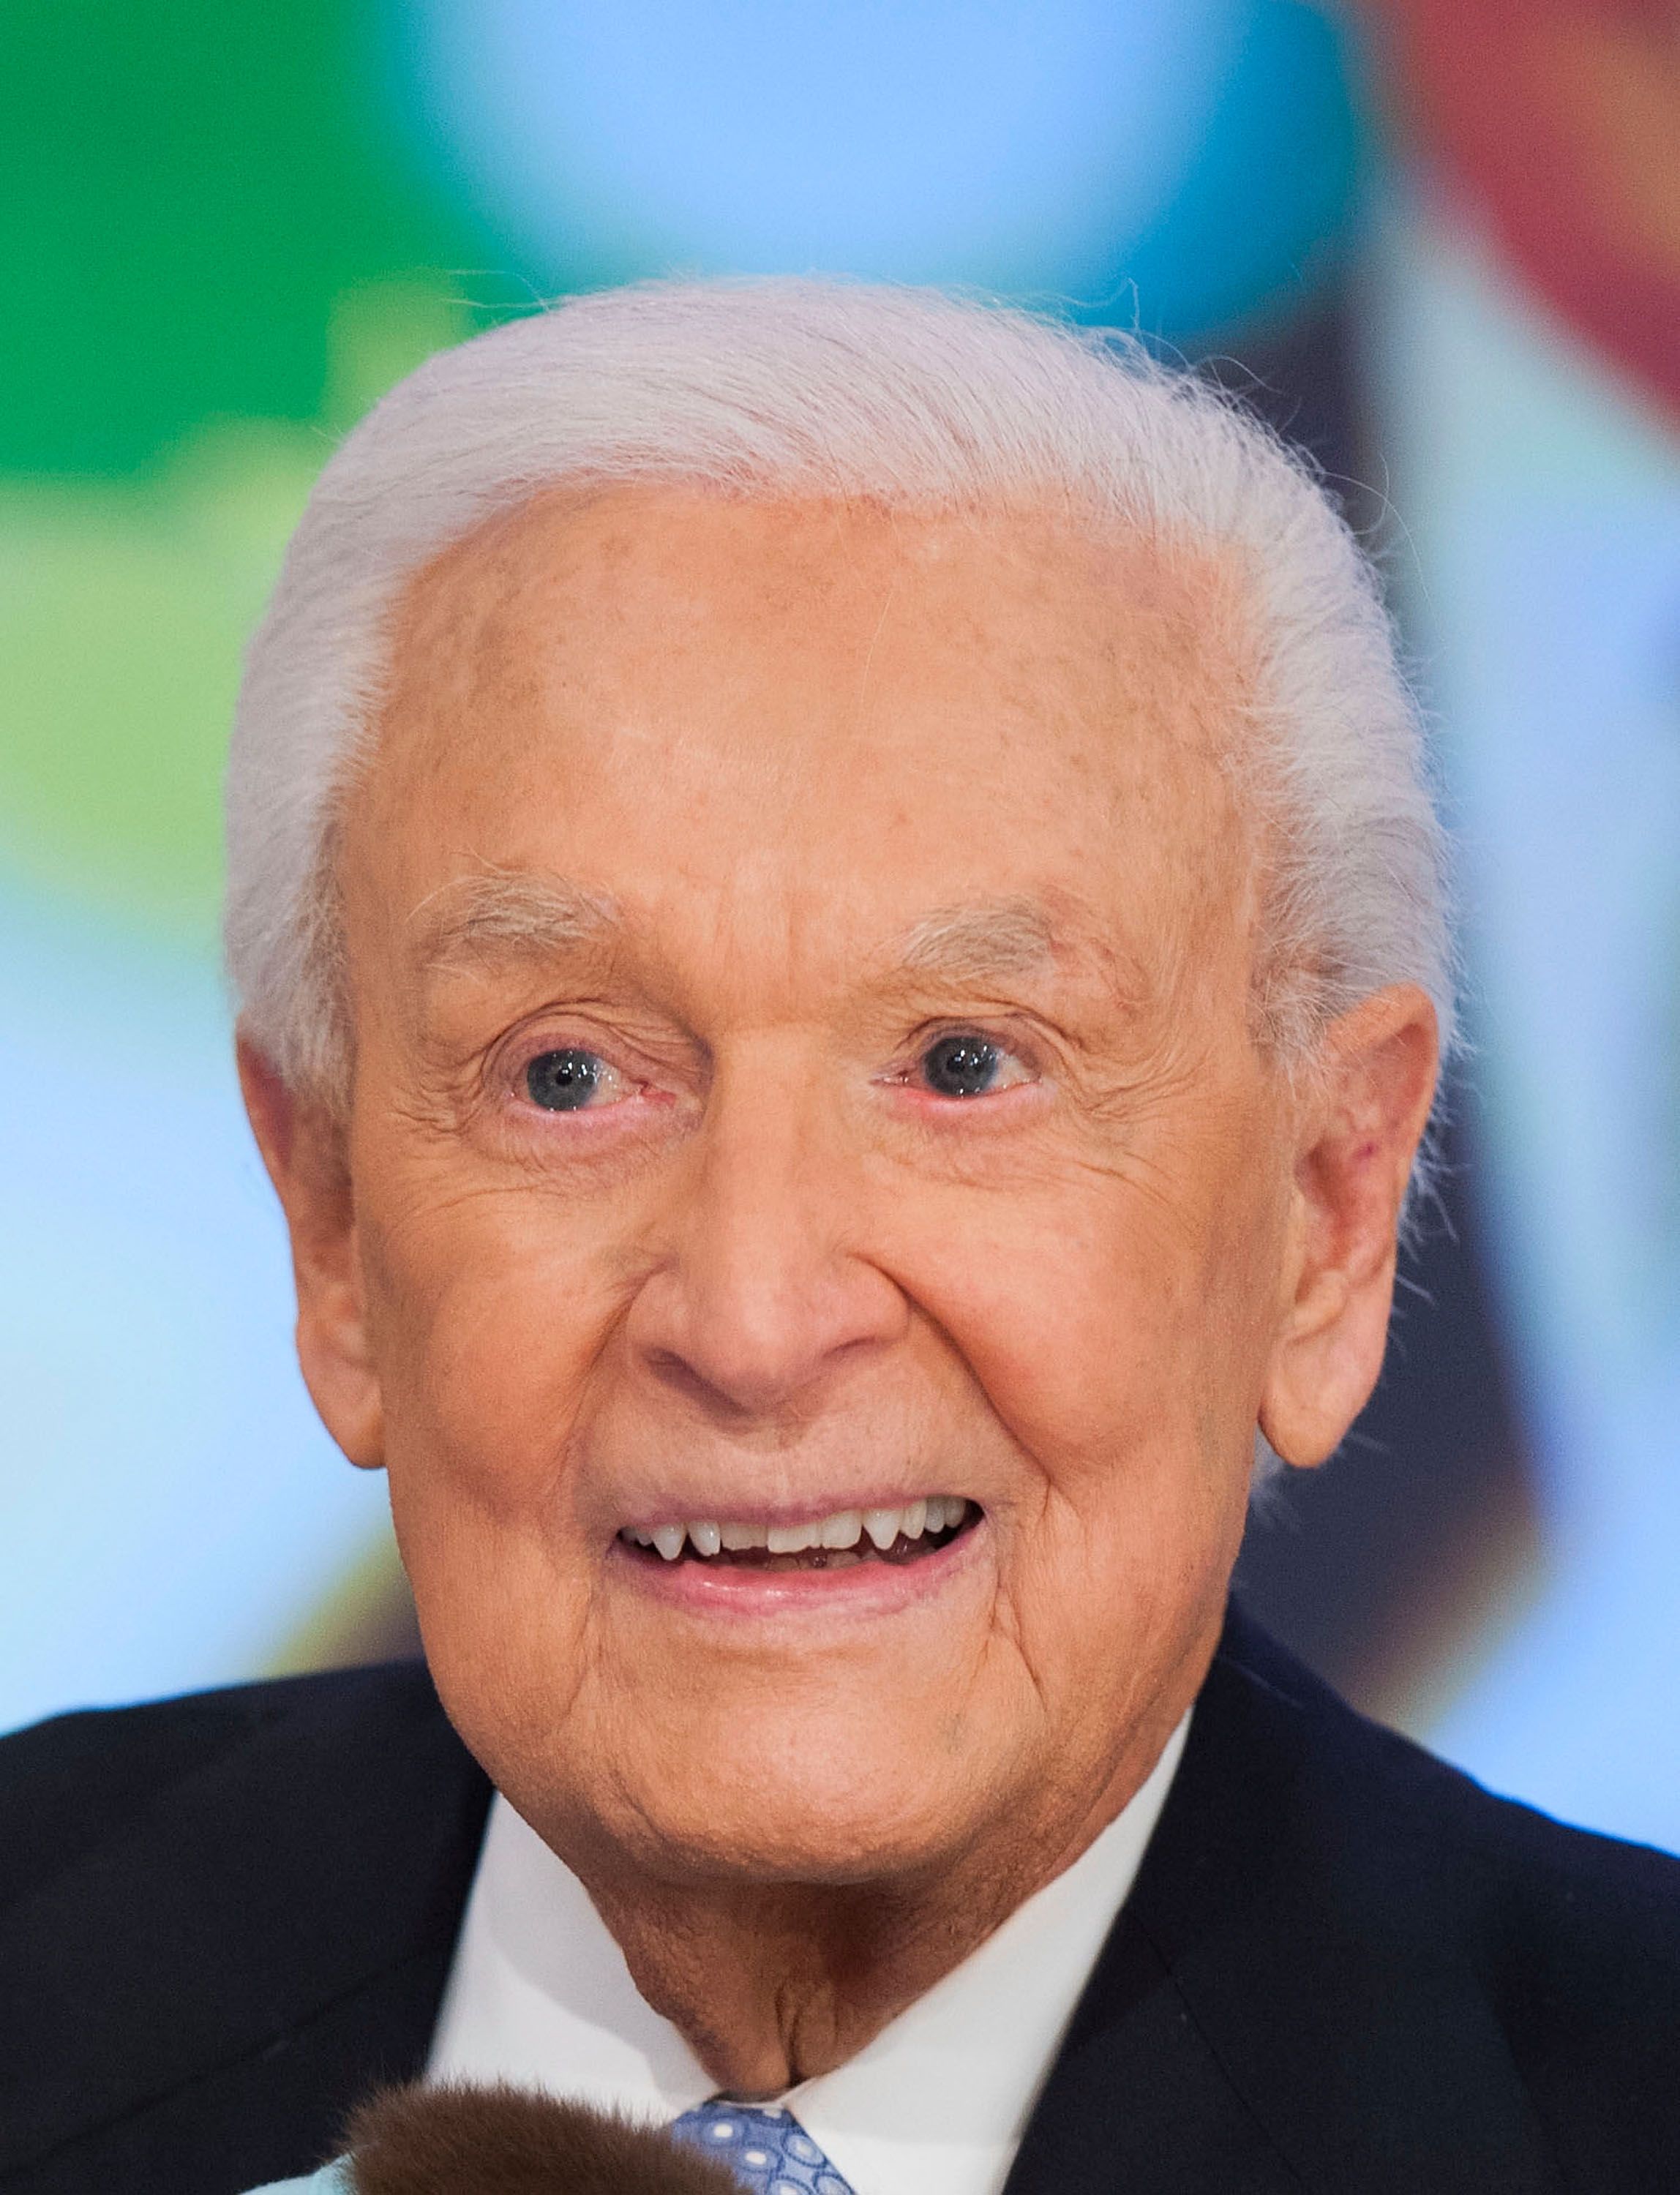 Bob Barker during CBS' "The Price Is Right" celebrates Bob Barker's 90th birthday at CBS Television City on November 5, 2013, in Los Angeles, California. | Source: Getty Images